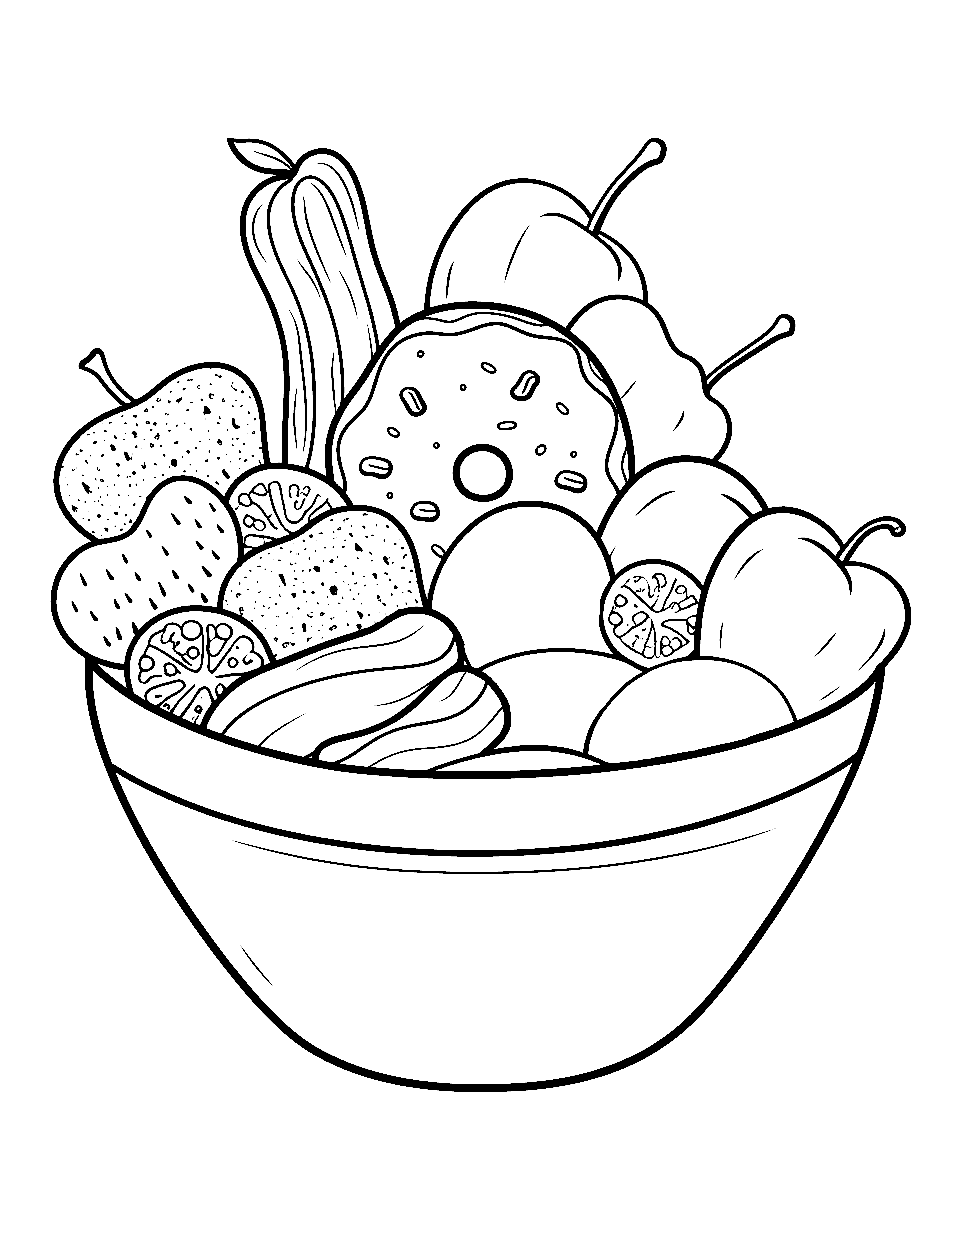 Snack Bowl Food Coloring Page - A snack bowl full of delicious foods for guests.